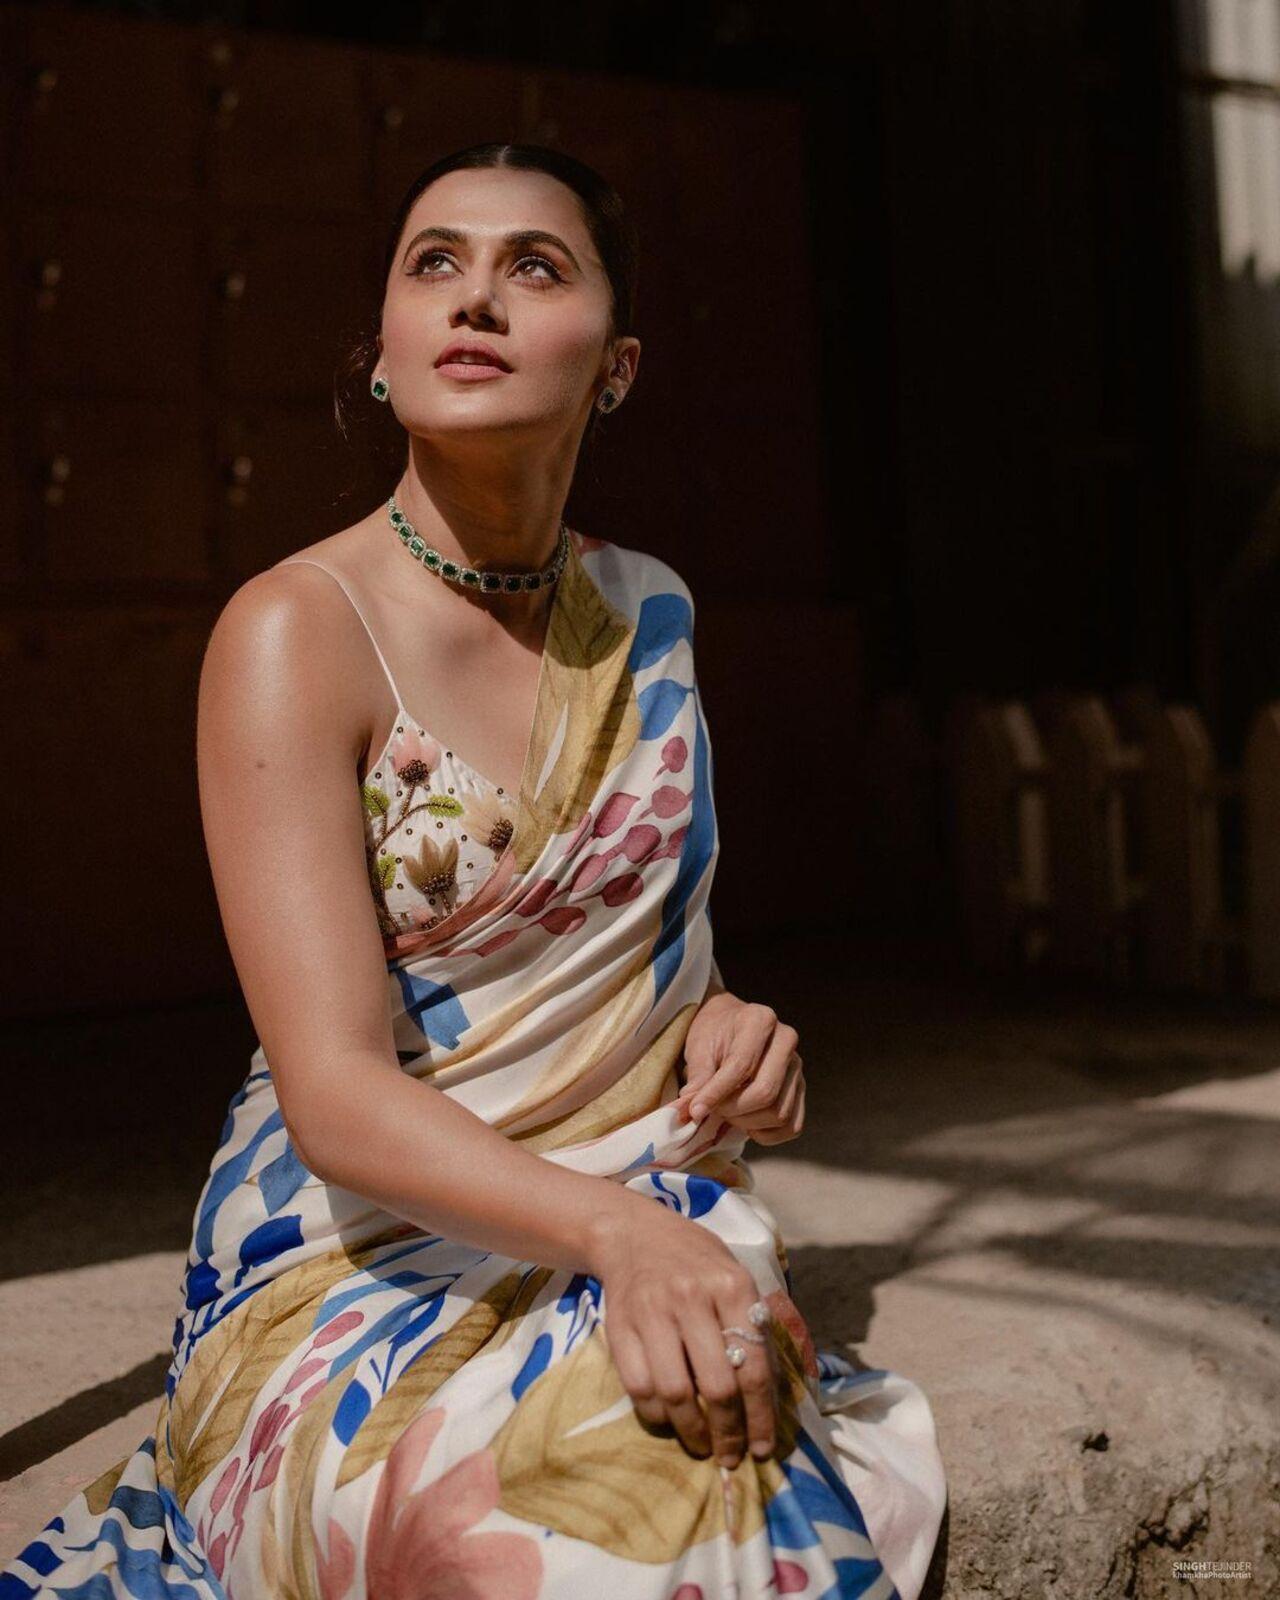 Taapsee ditched heavy jewelry and, while maintaining the simplicity of the saree, she added a simple necklace with matching studs